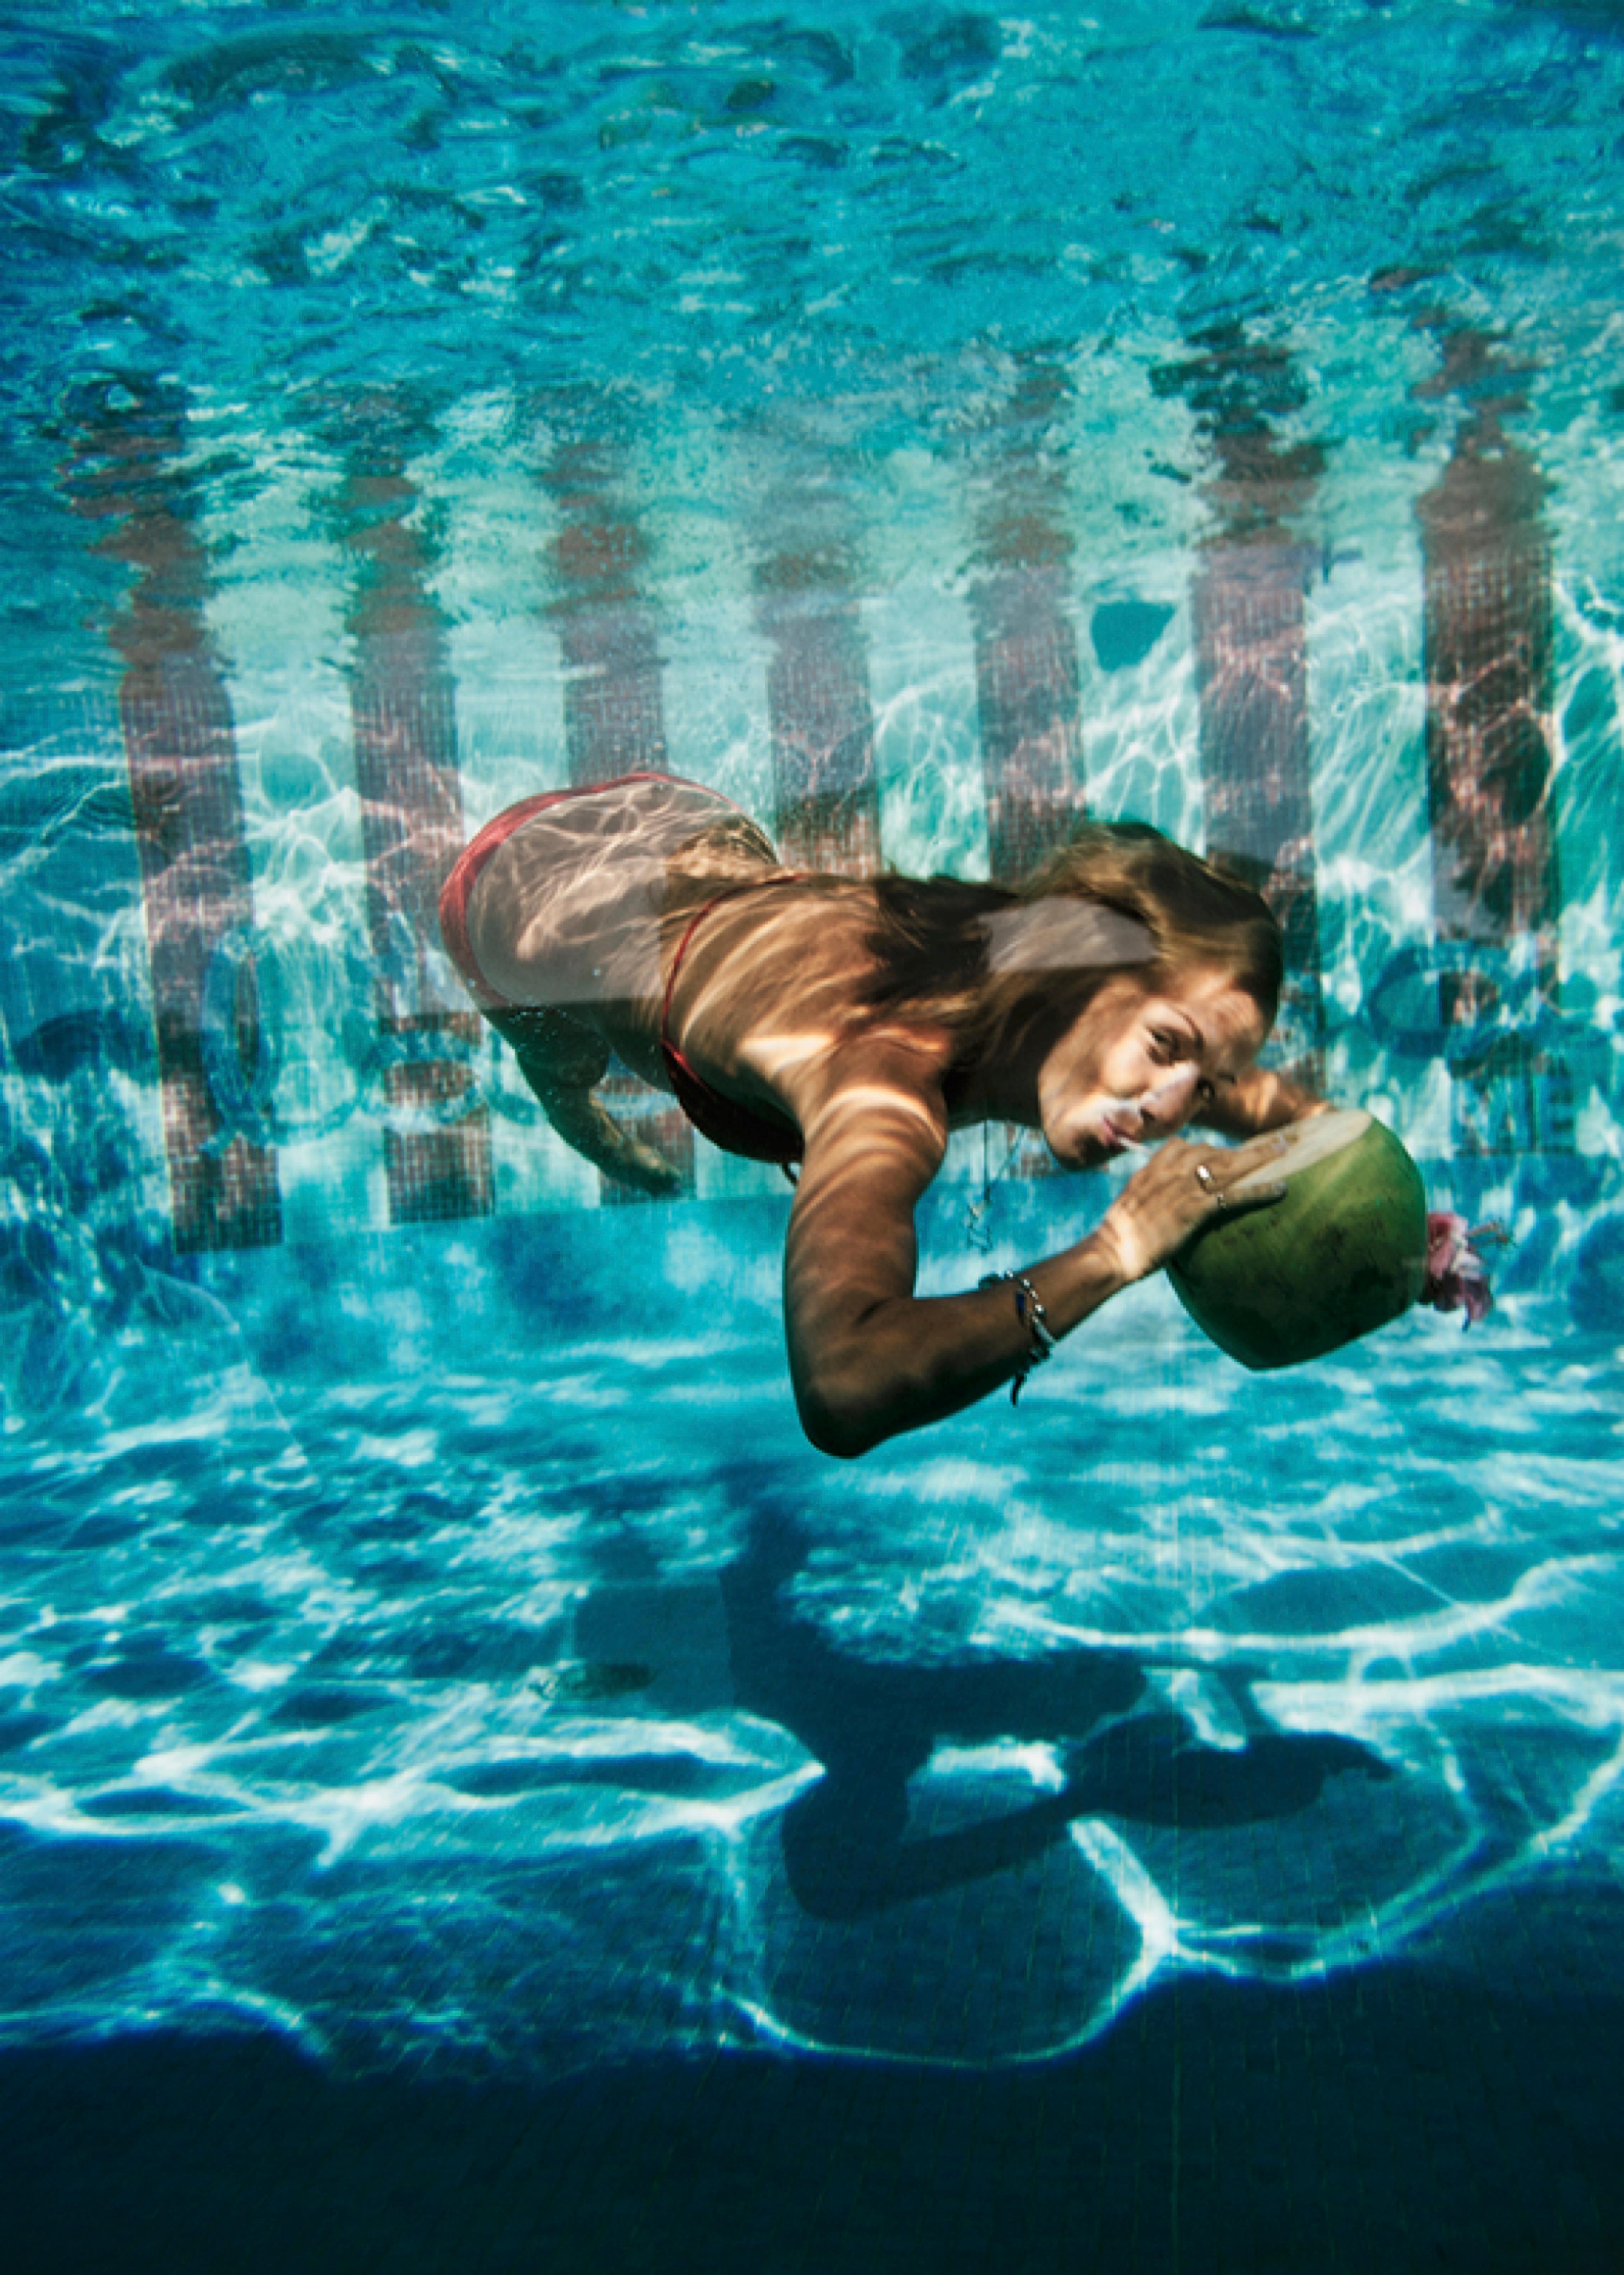 Underwater Drink

1972

 A woman drinking from a coconut underwater in the pool at Las Brisas Hotel in Acapulco, Mexico, February 1972.

By Slim Aarons

30x20” / 76x51 cm - paper size 
C-Type Print
unframed 

Estate Stamped Edition 
Edition of 150